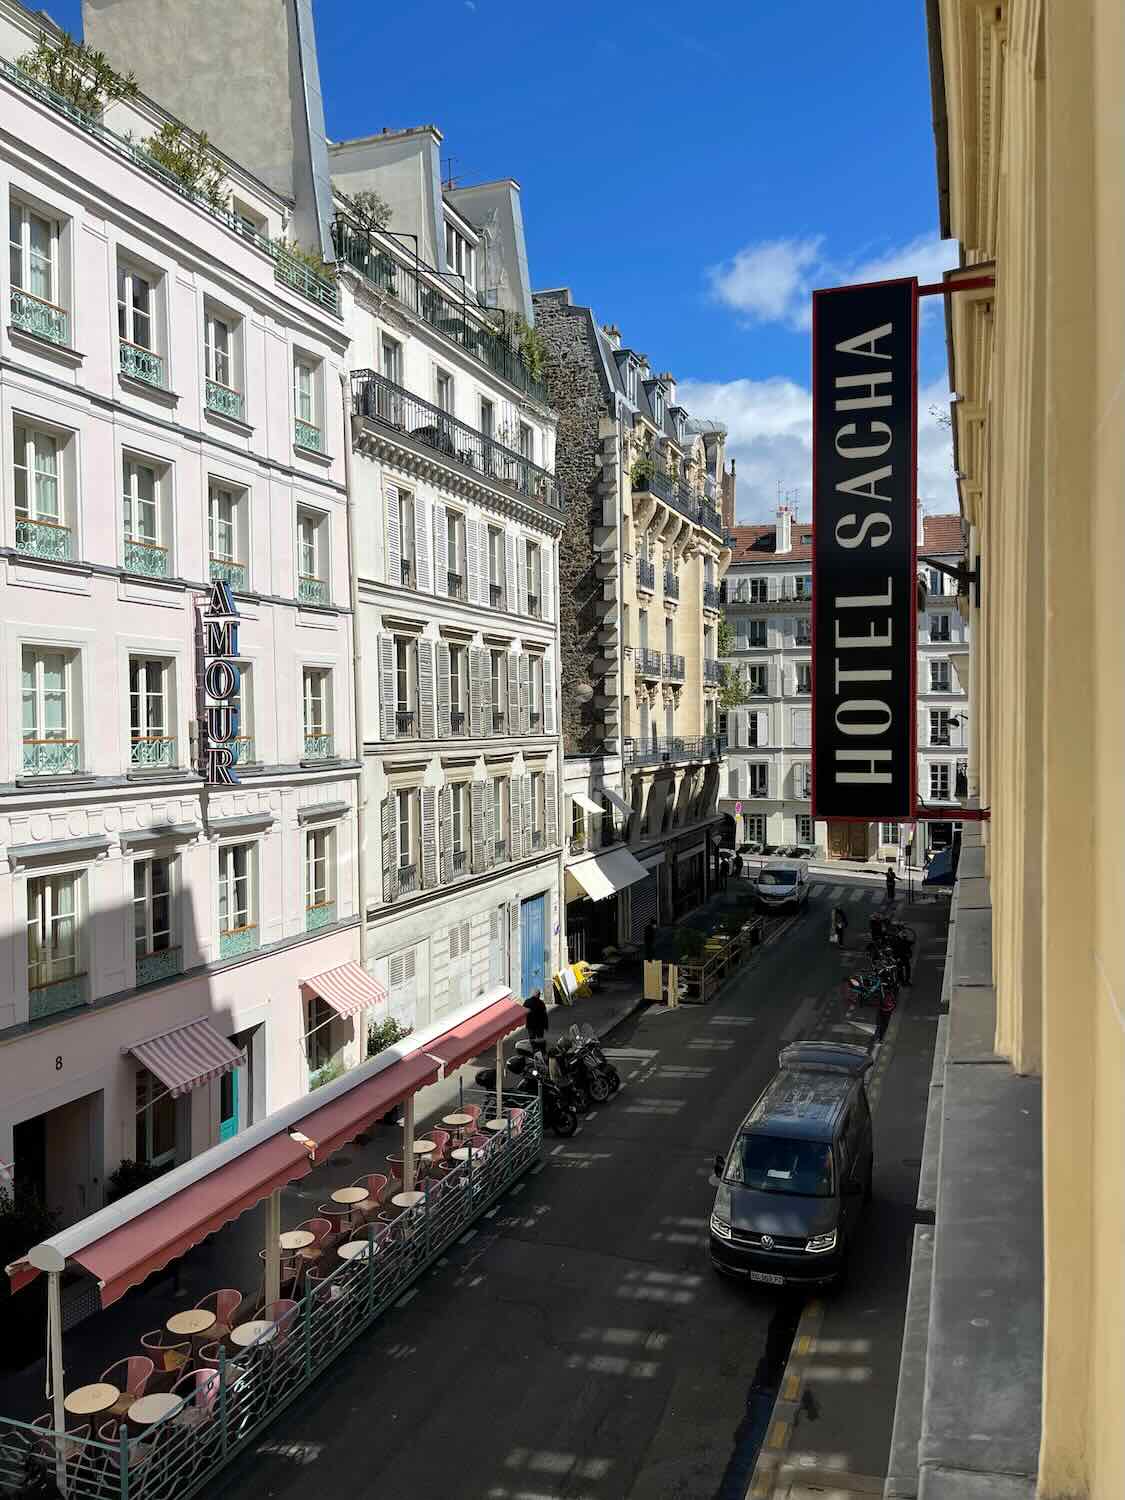 A picturesque view of the street outside Hotel Sacha in Paris, showing the charming facade of the hotel and nearby buildings with outdoor seating areas and a clear blue sky overhead.